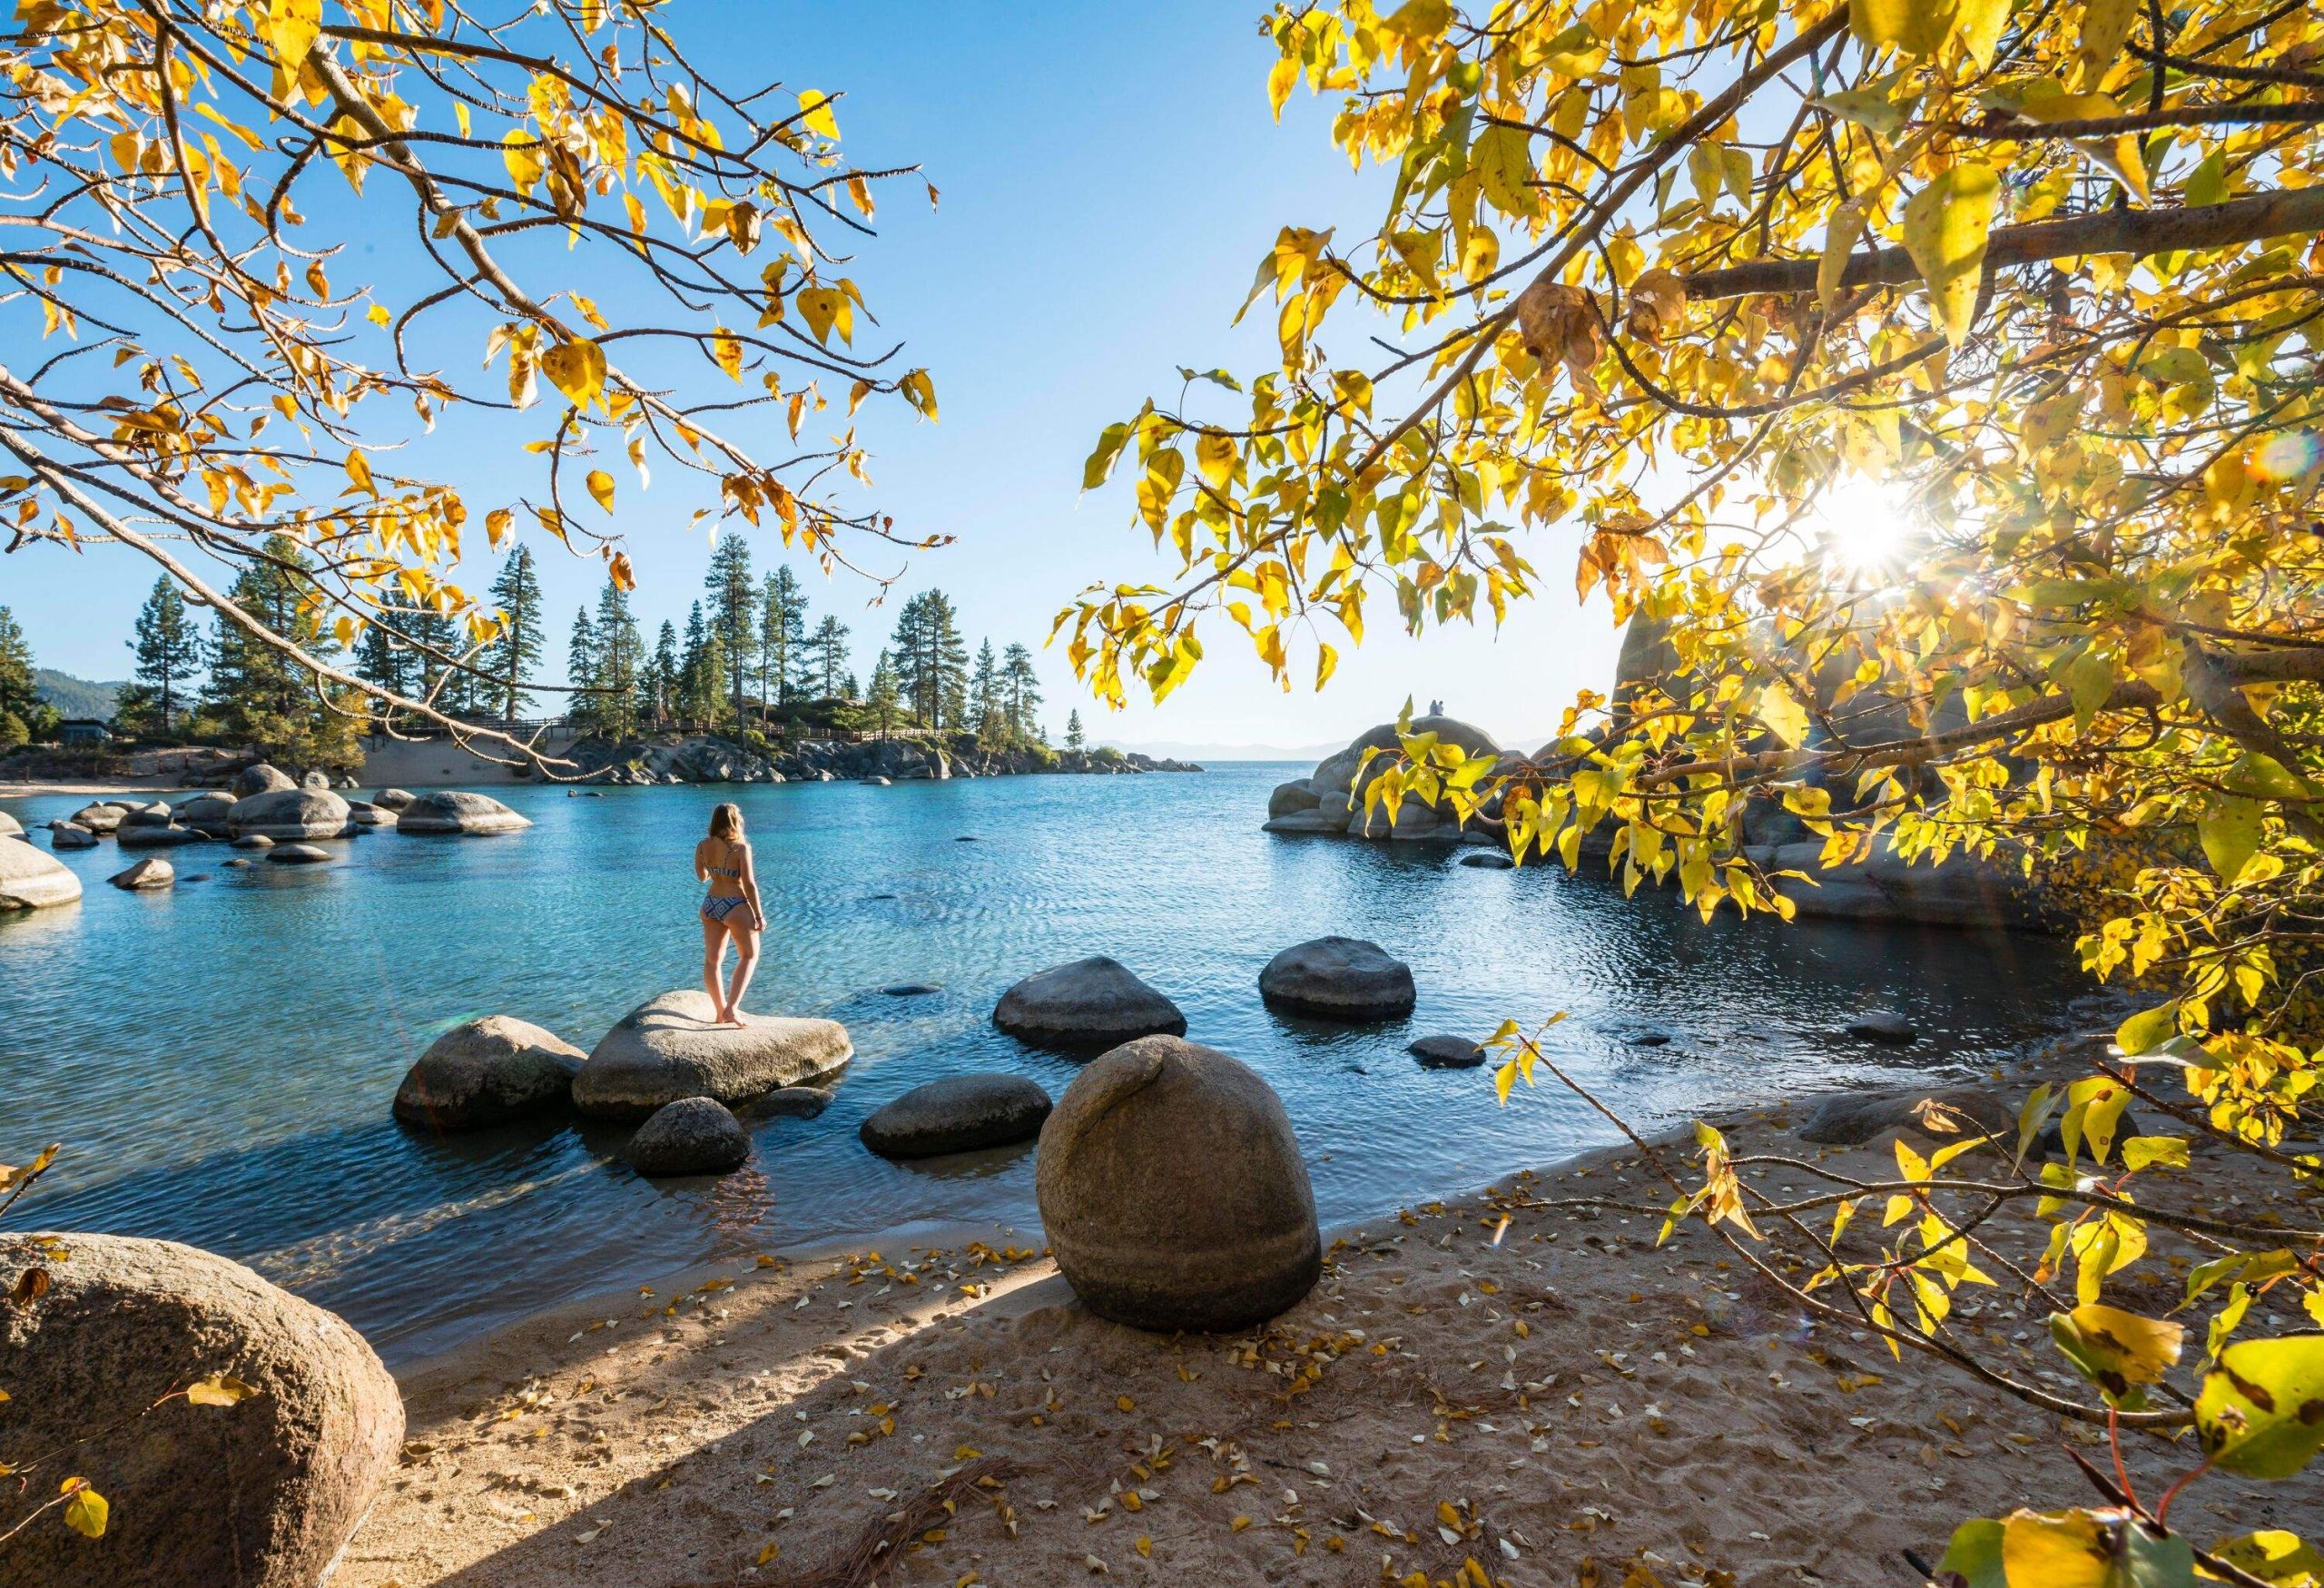 A person standing on the boulders in the shallow part of the lake, with the sun shining through the yellow autumn leaves in the foreground.